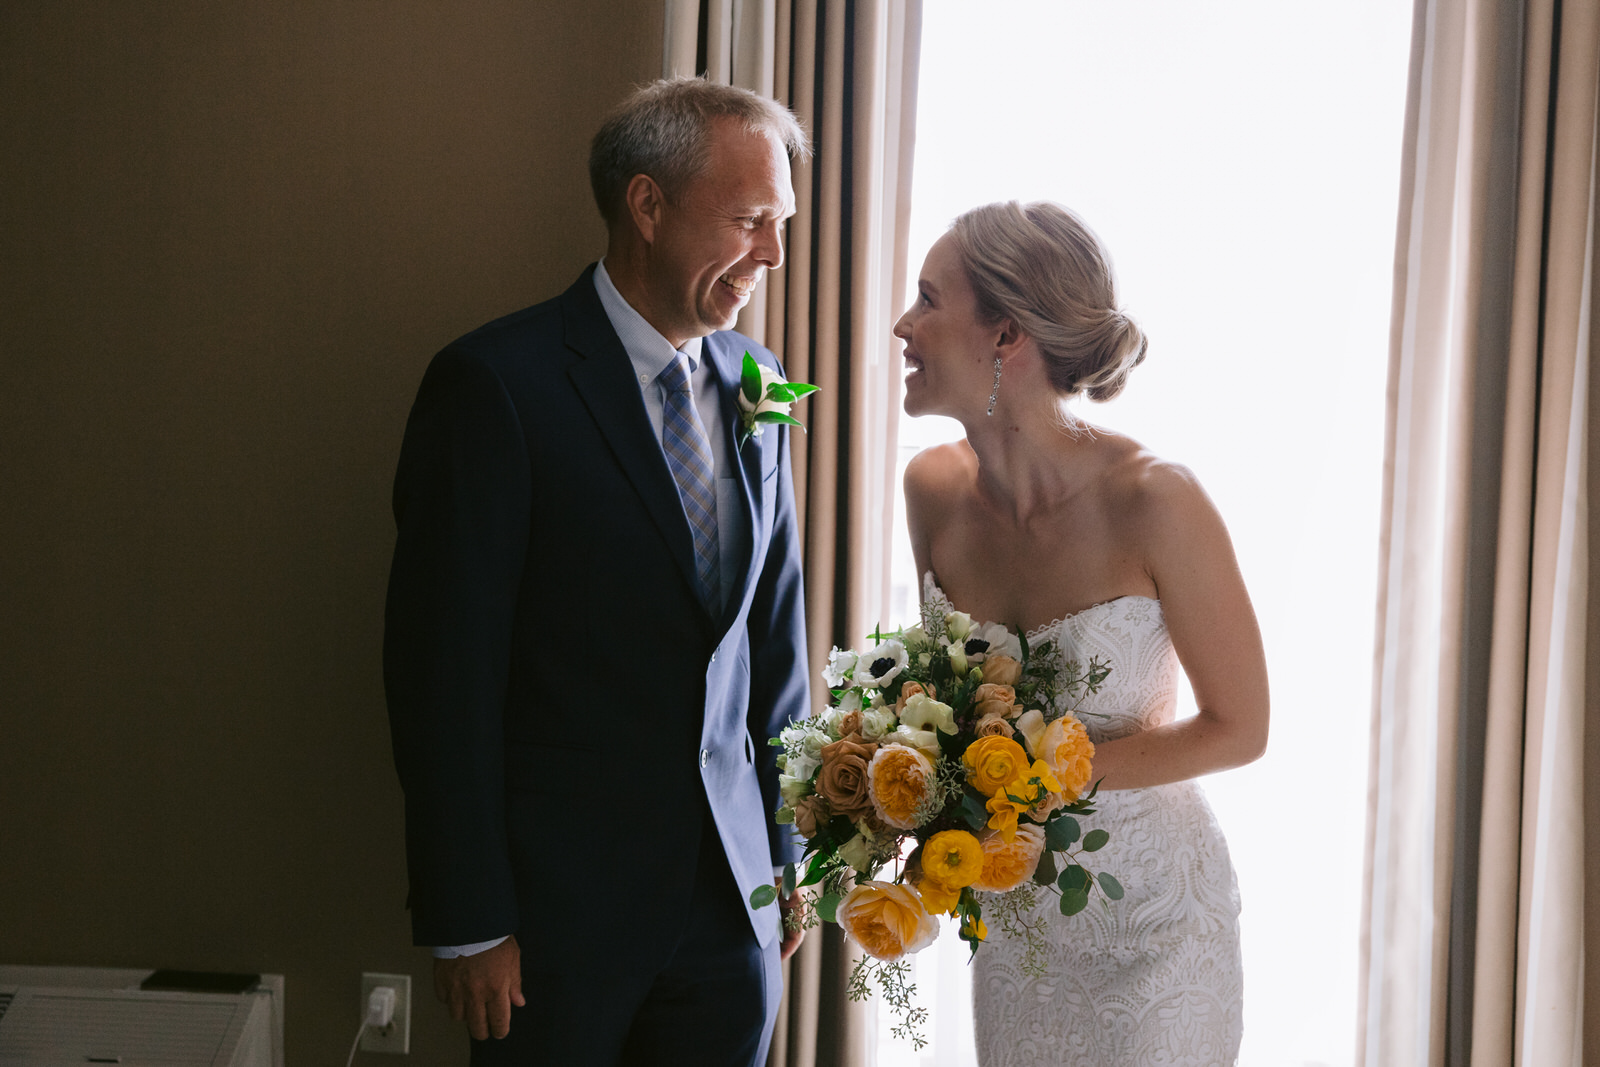 Bride with her father peabody essex museum wedding